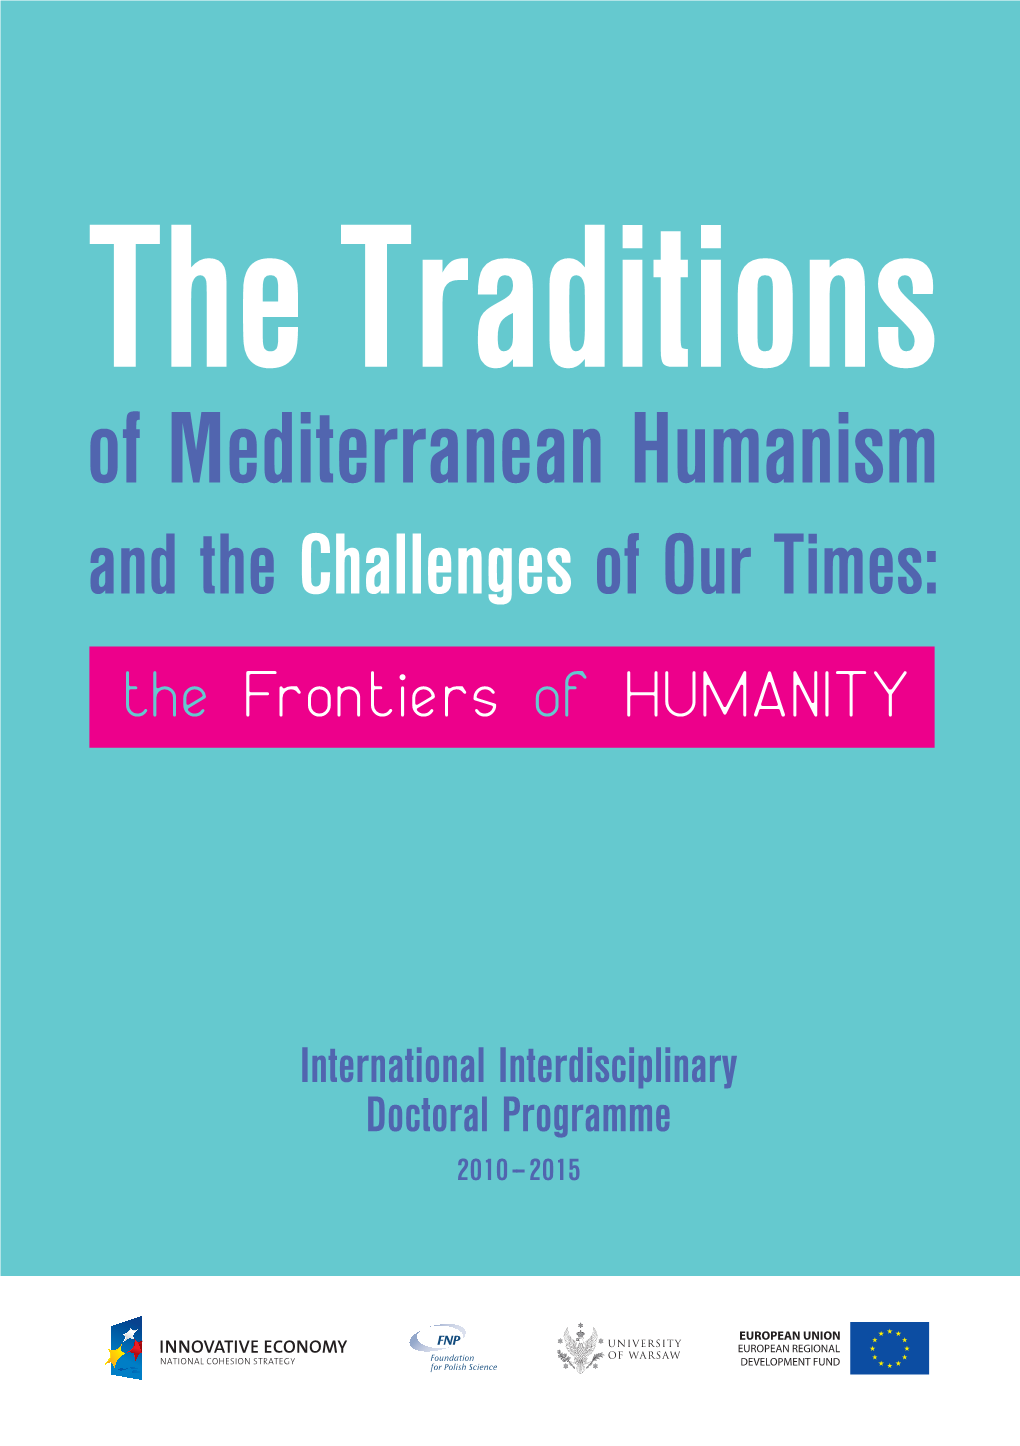 The Traditions of Mediterranean Humanism and the Challenges of Our Times